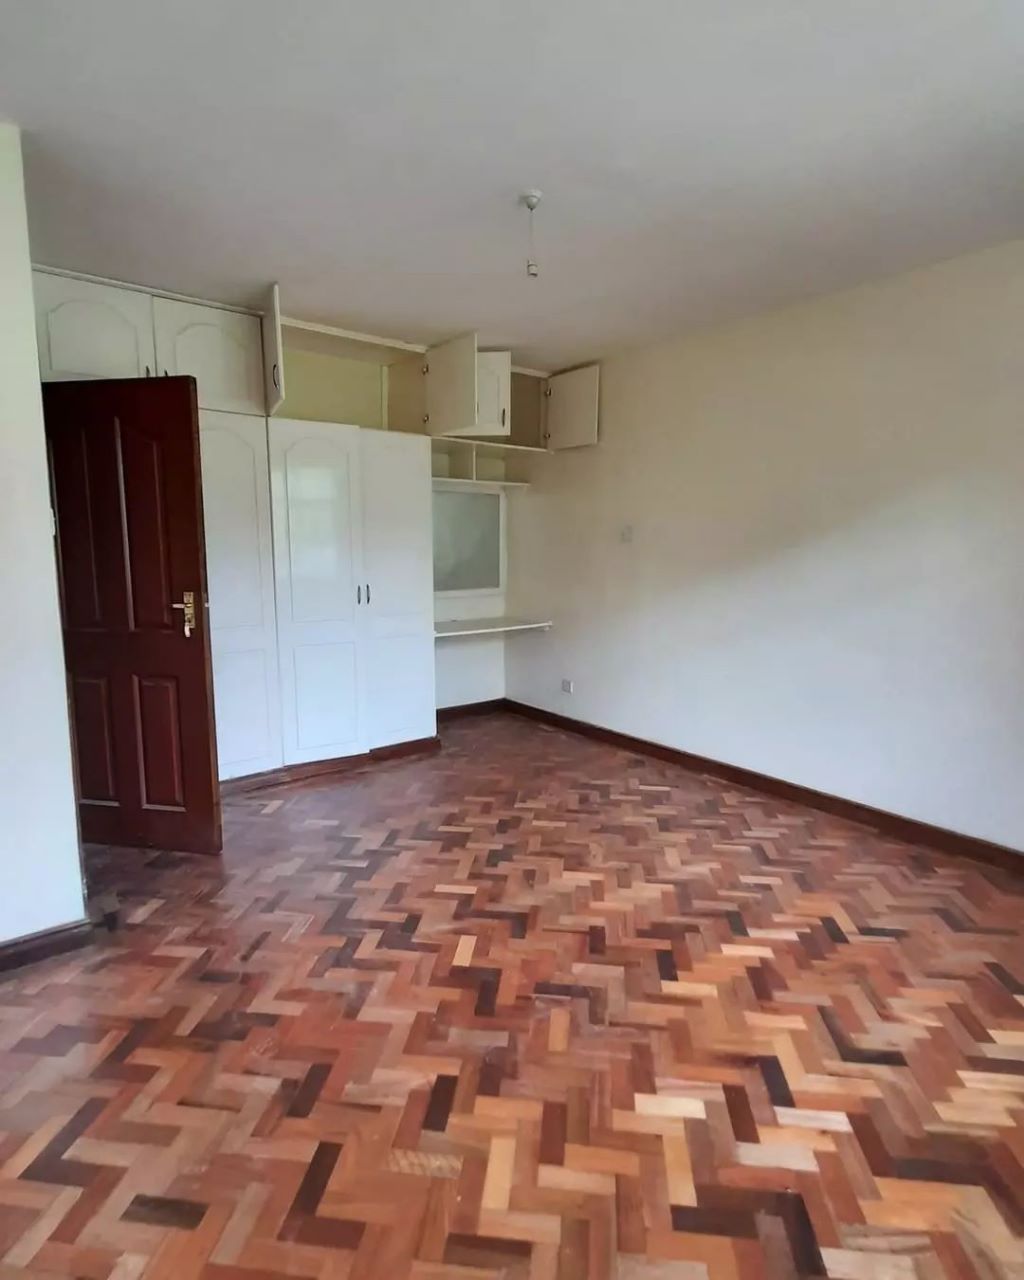 3 Bedroom apartment (master En-suite) Available to Let Kilimani near the junction mall. Musilli Homes